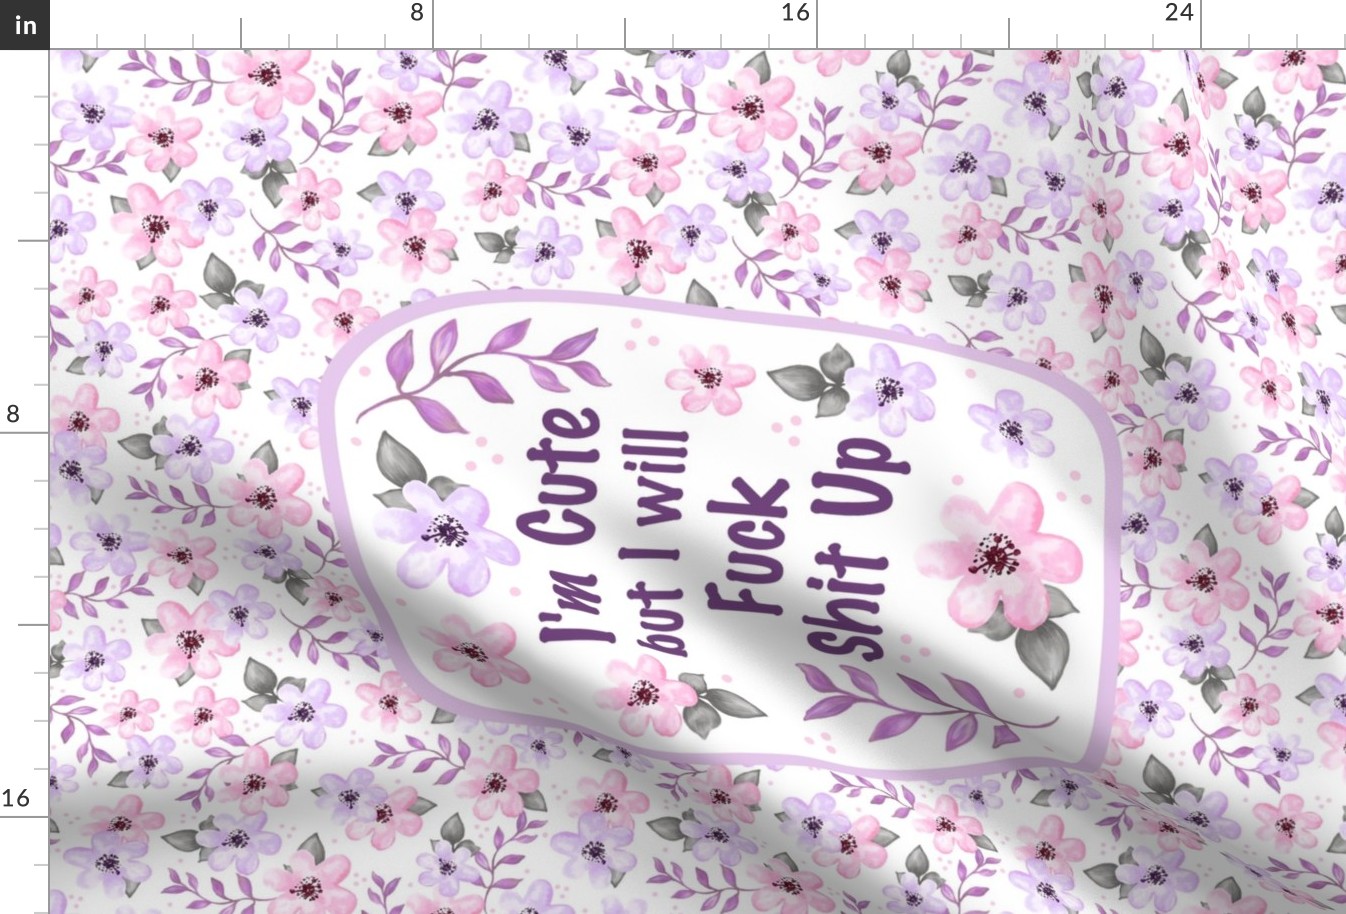 Large 27x18 Fat Quarter Panel I'm Cute But I Will Fuck Shit Up Sarcastic Sweary Adult Humor Floral on White for Tea Towel or Wall Hanging